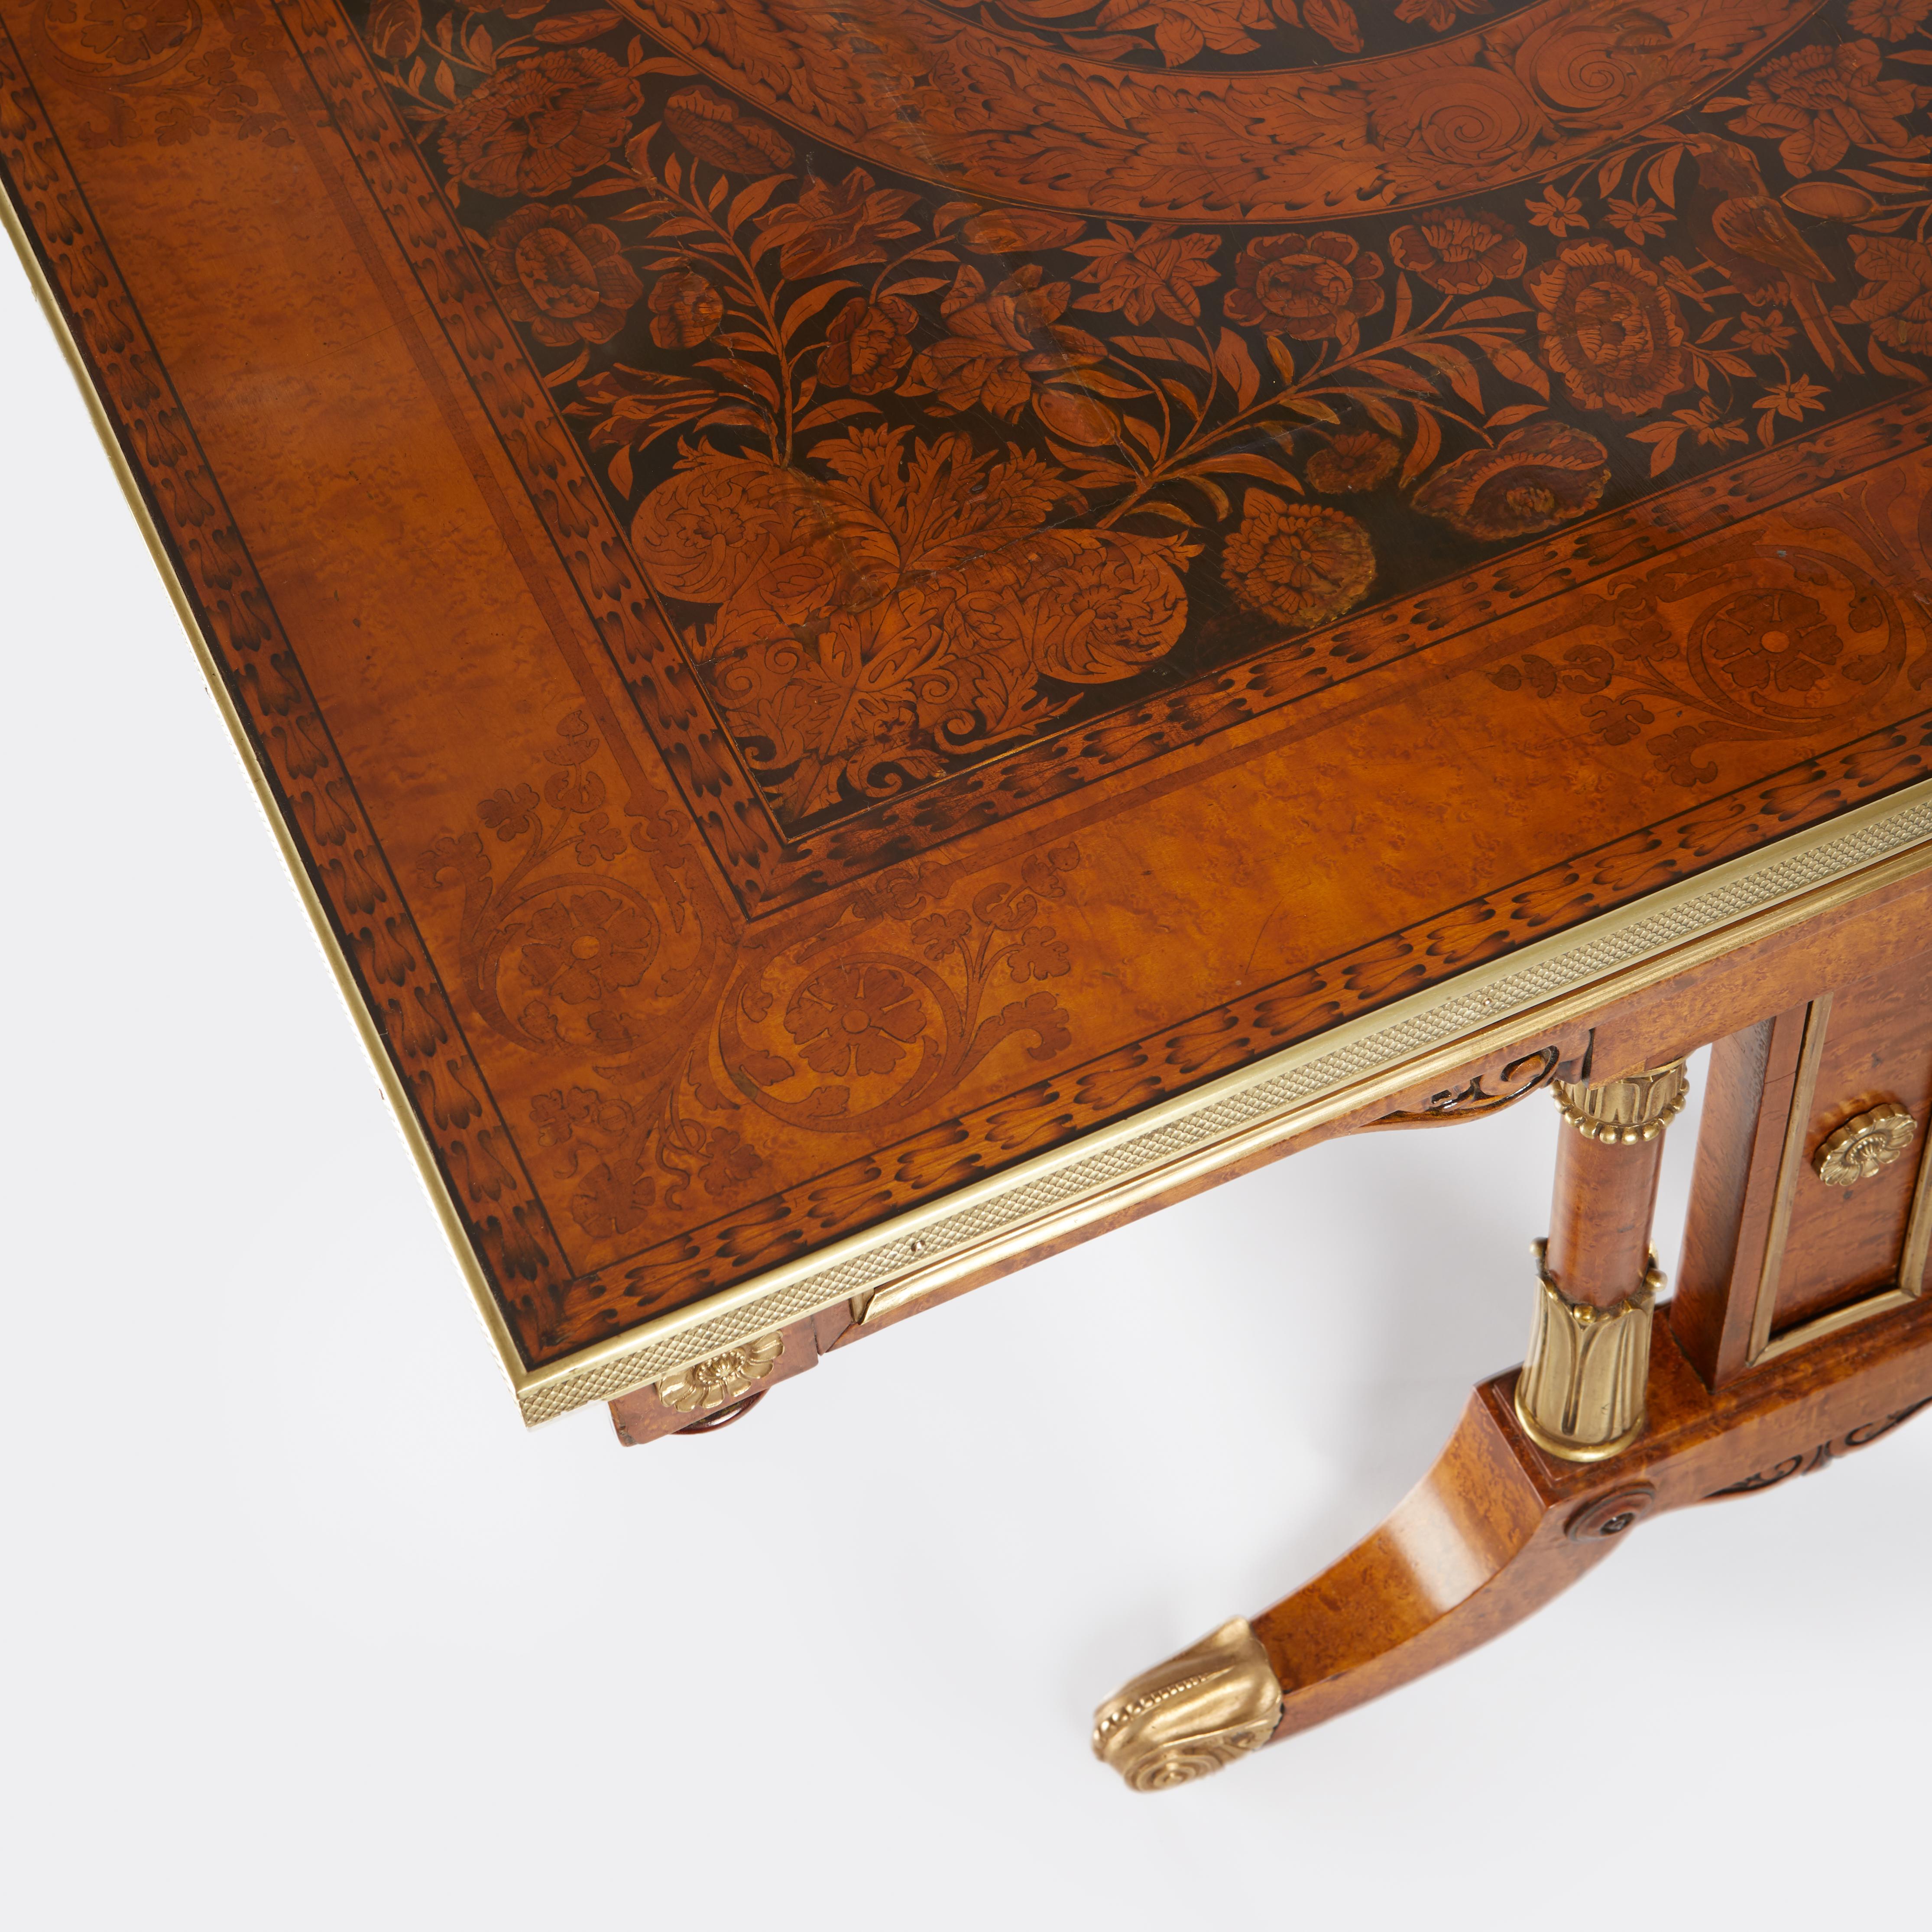 19th Century Rectangular Marquetry Inlay Coffee Table by Mallett